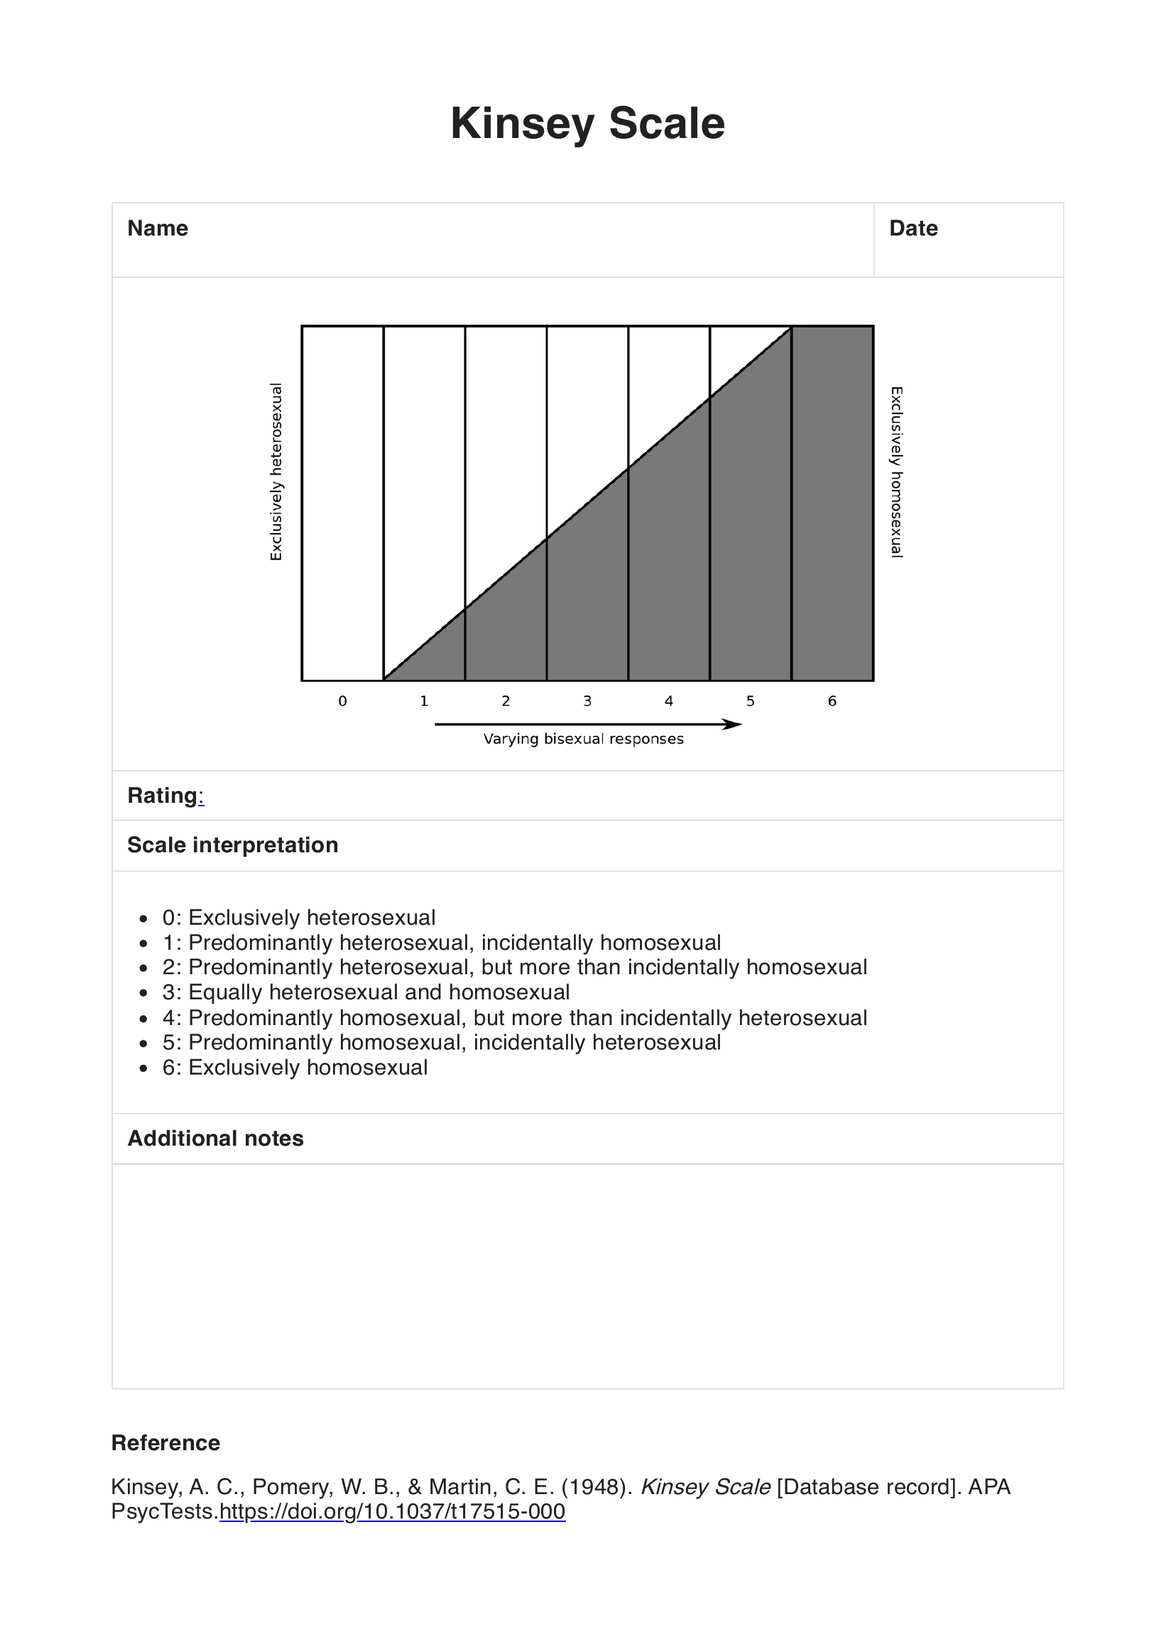 Kinsey Scale PDF Example